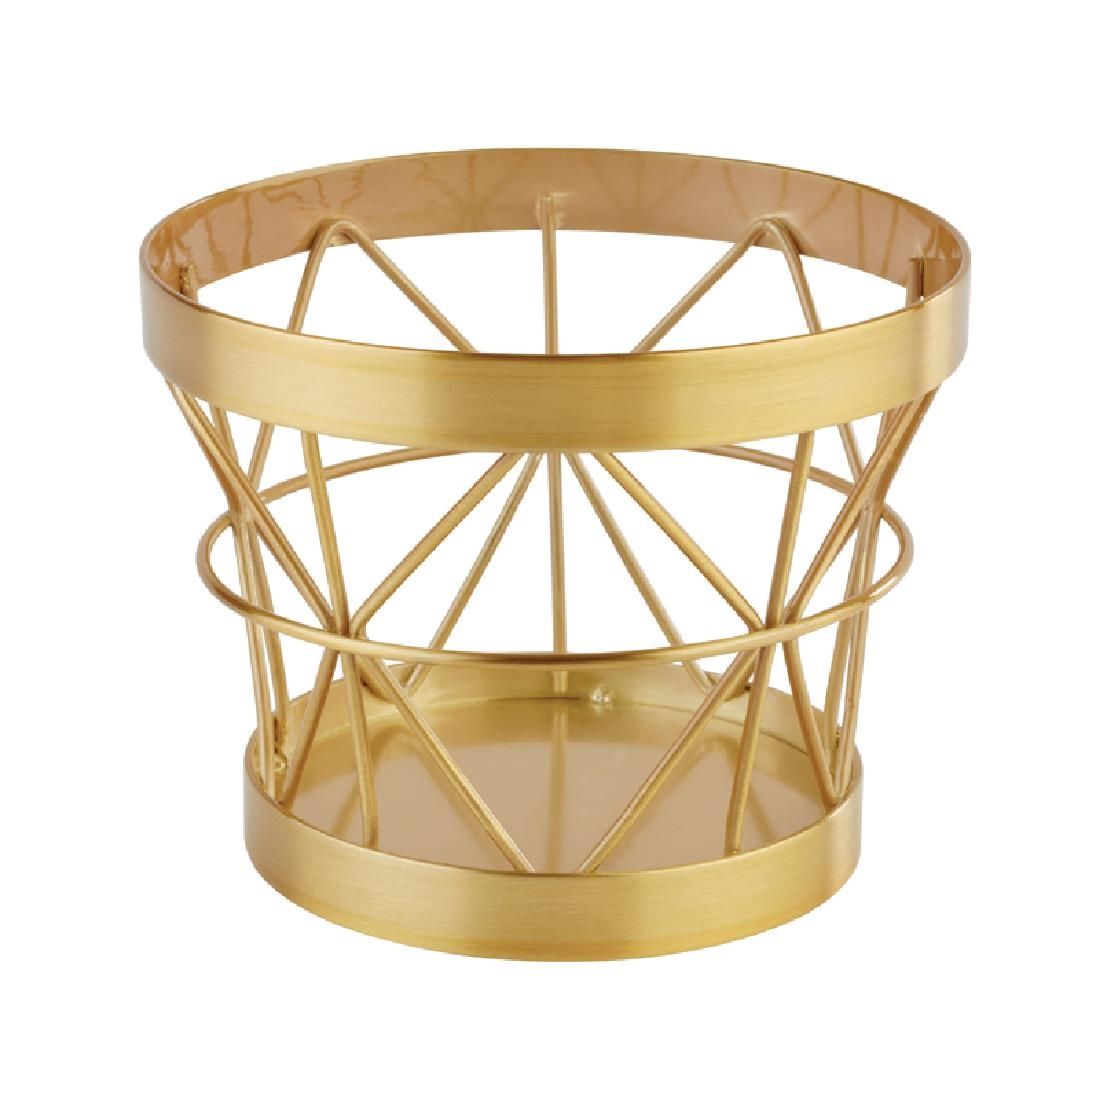 CW699 APS+ Metal Basket Gold Brushed 80 x 105mm JD Catering Equipment Solutions Ltd